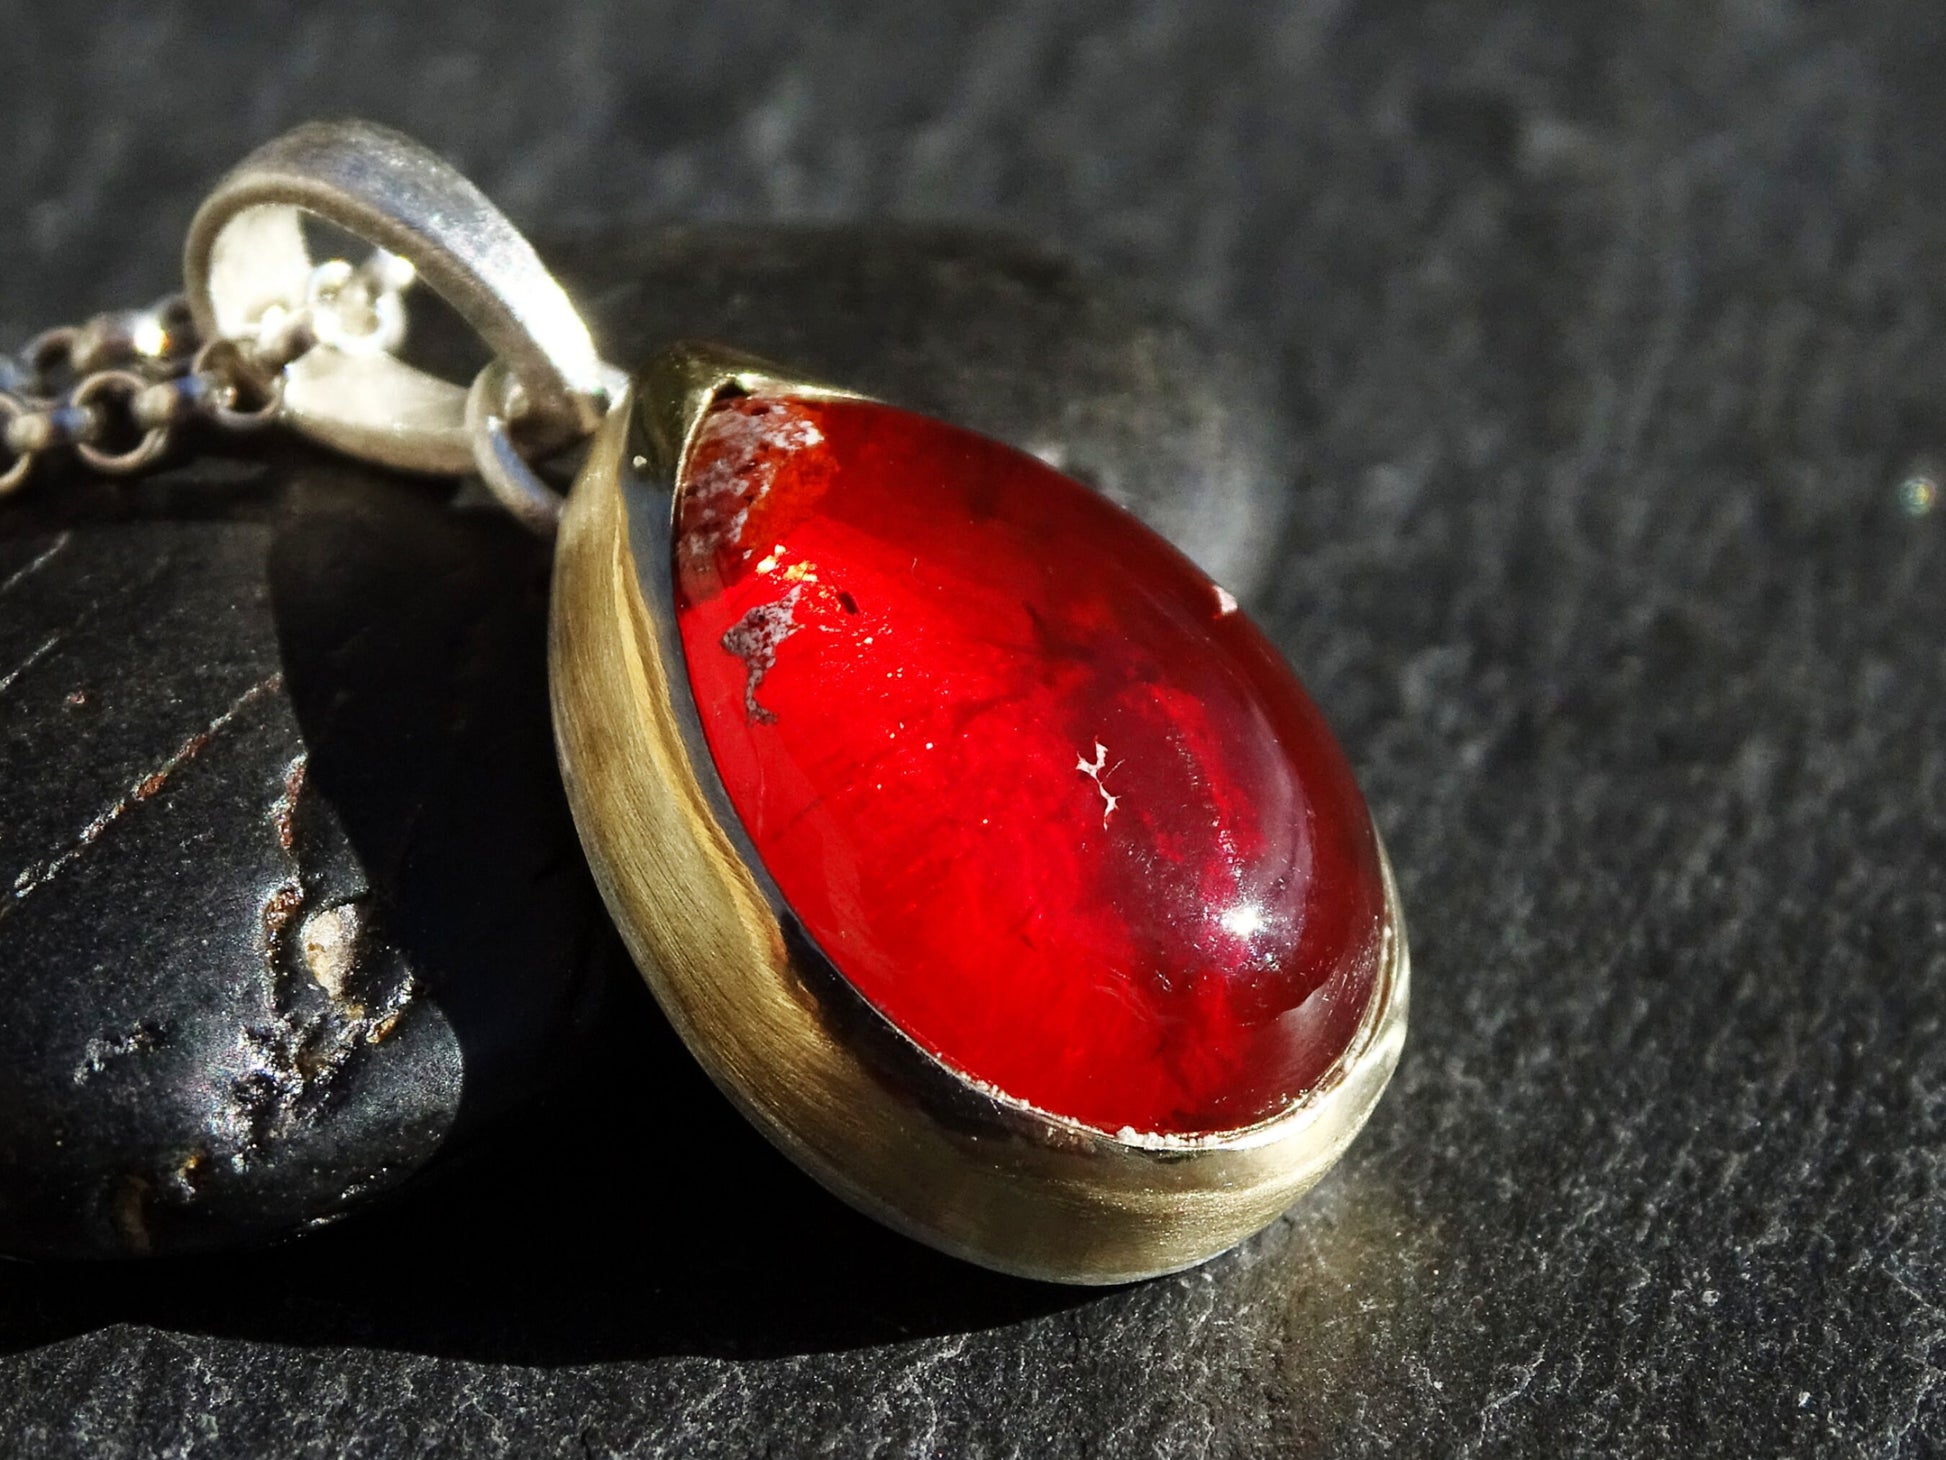 red fire opal pendant in gold and silver, opal charm pendant, fire opal crystal pendant, layering necklace, unique anniversary gift for her - CrazyAss Jewelry Designs